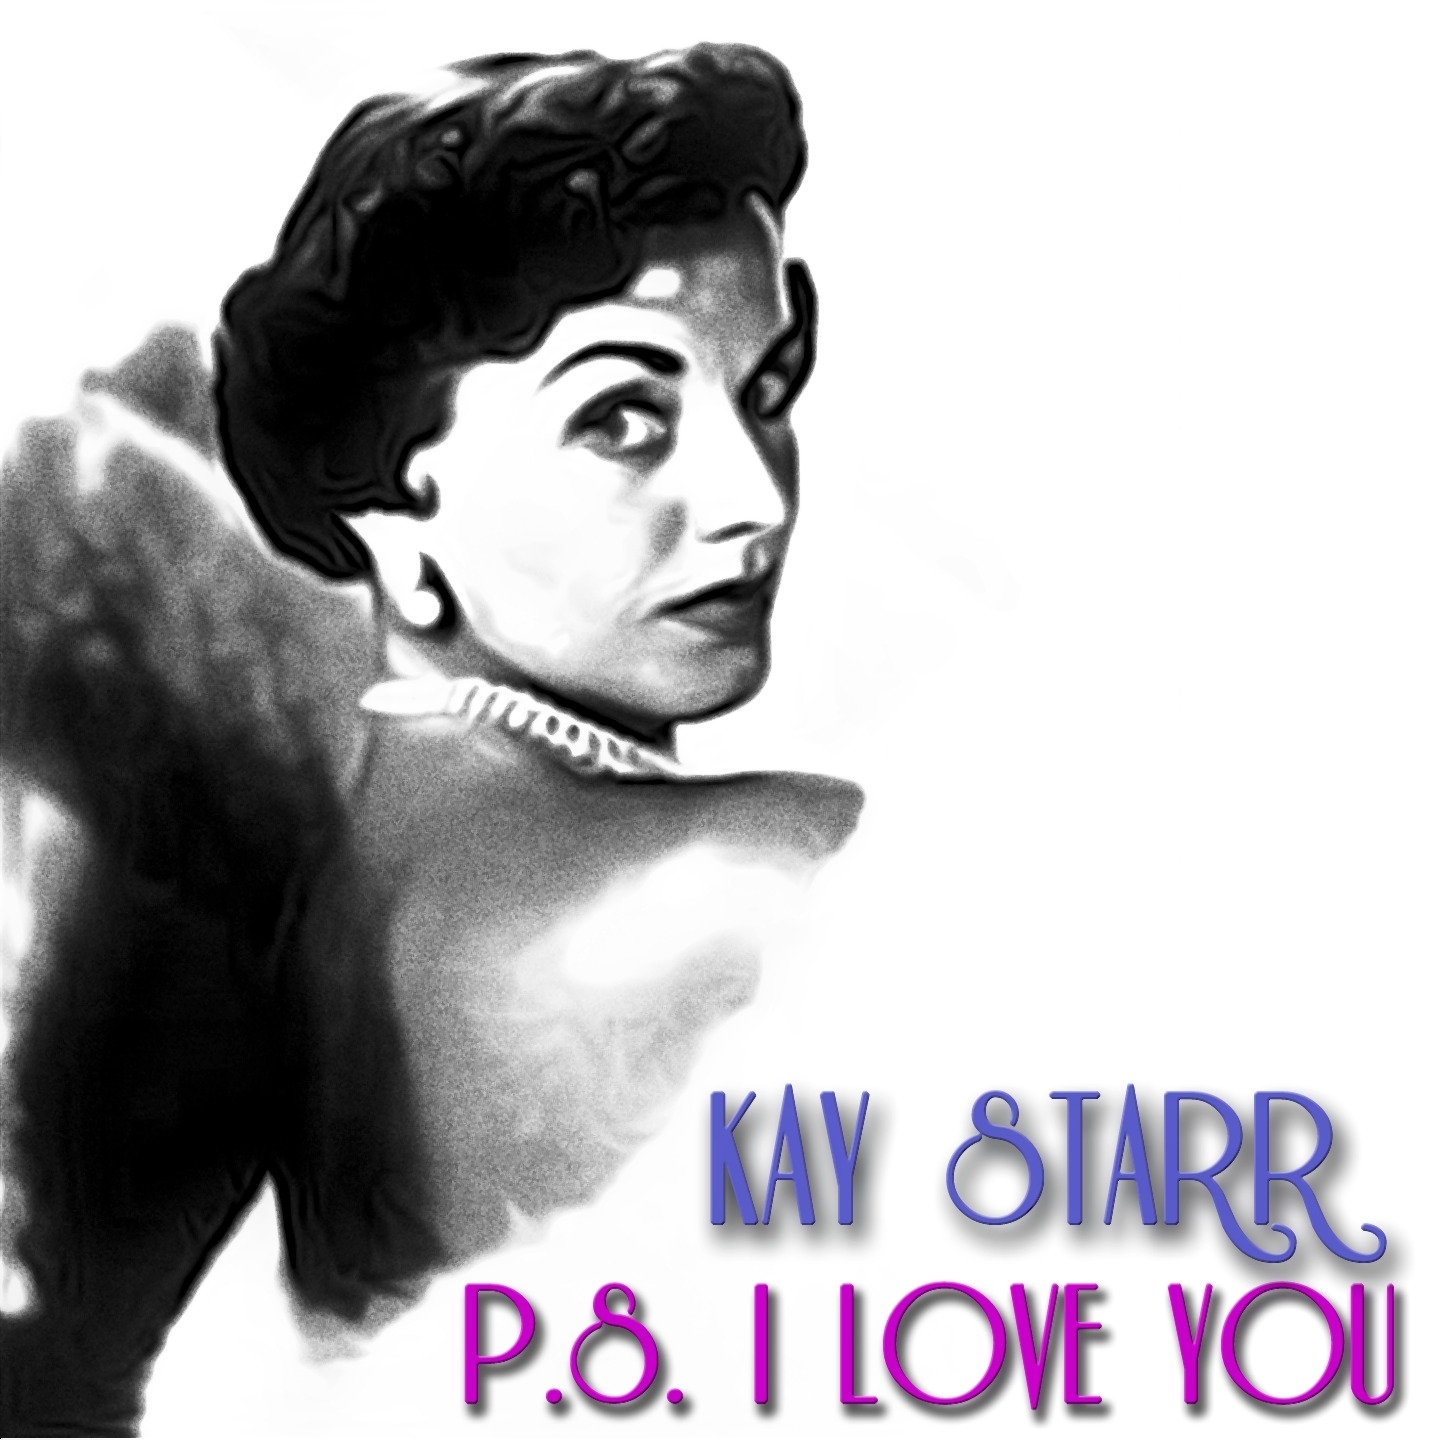 P. S. I Love You (Remastered)